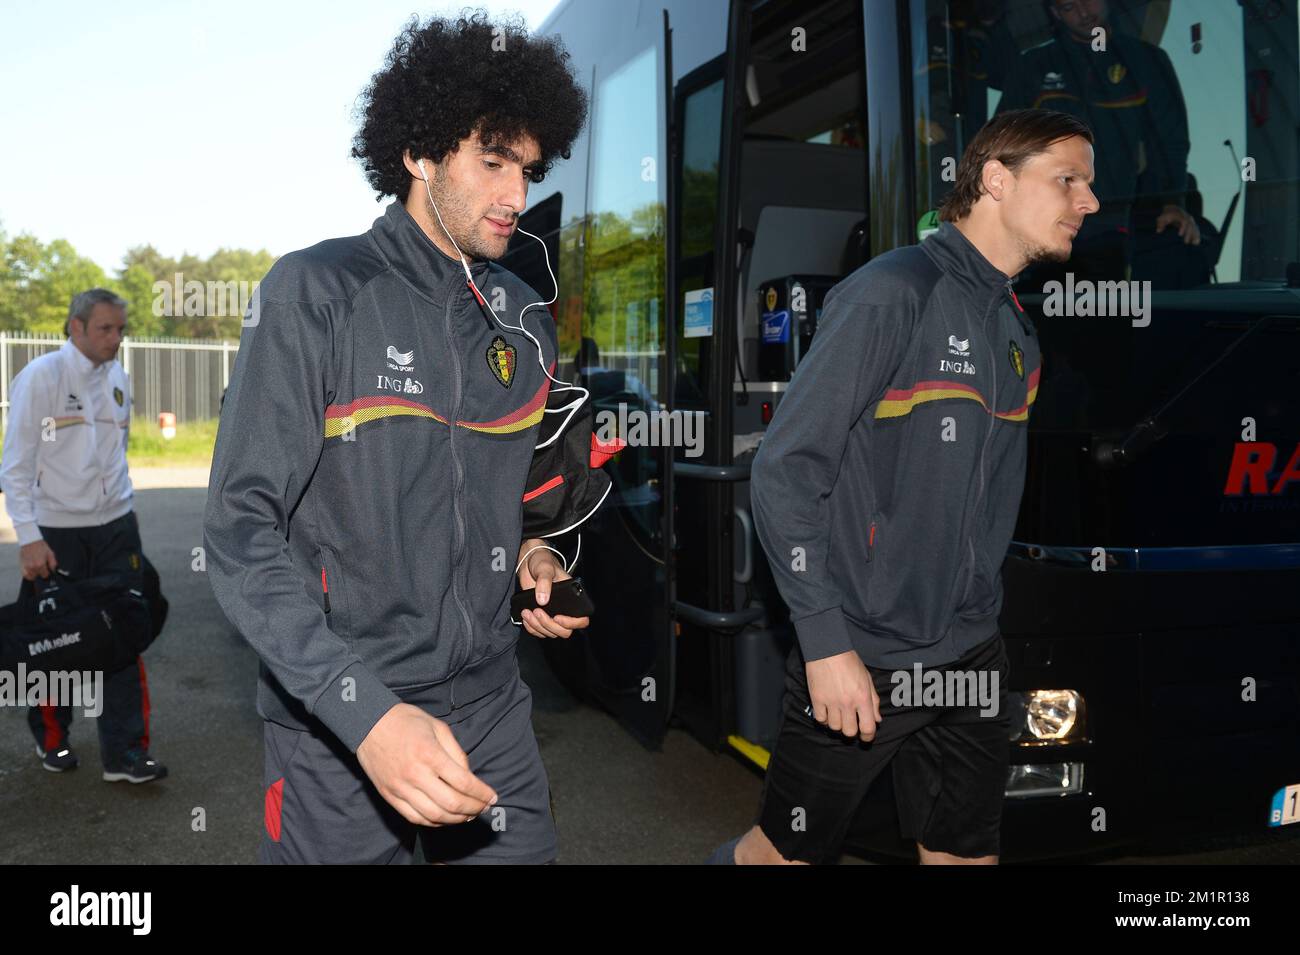 Belgium's Marouane Fellaini and Belgium's Daniel Van Buyten (right) arrive for a training session of the Belgium national soccer team, Wednesday 05 June 2013 in Genk. The Red Devils are preparing for their qualification game for the 2014 FIFA World Cup against Serbia on June 7. Stock Photo